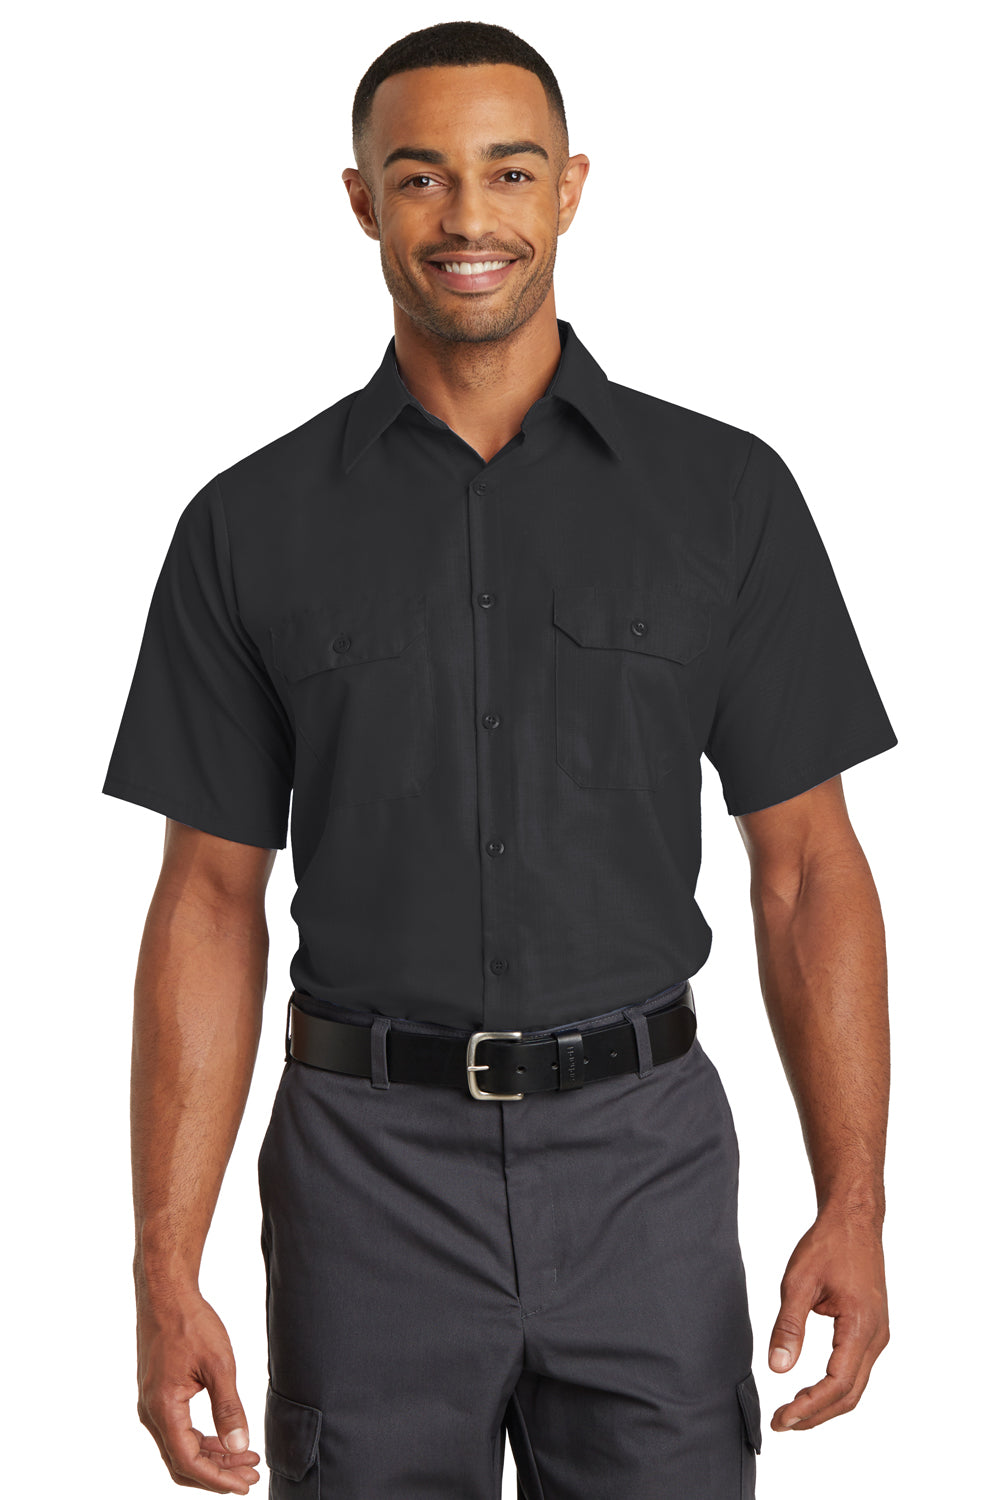 Red Kap SY60 Mens Moisture Wicking Short Sleeve Button Down Shirt w/ Double Pockets Black Front